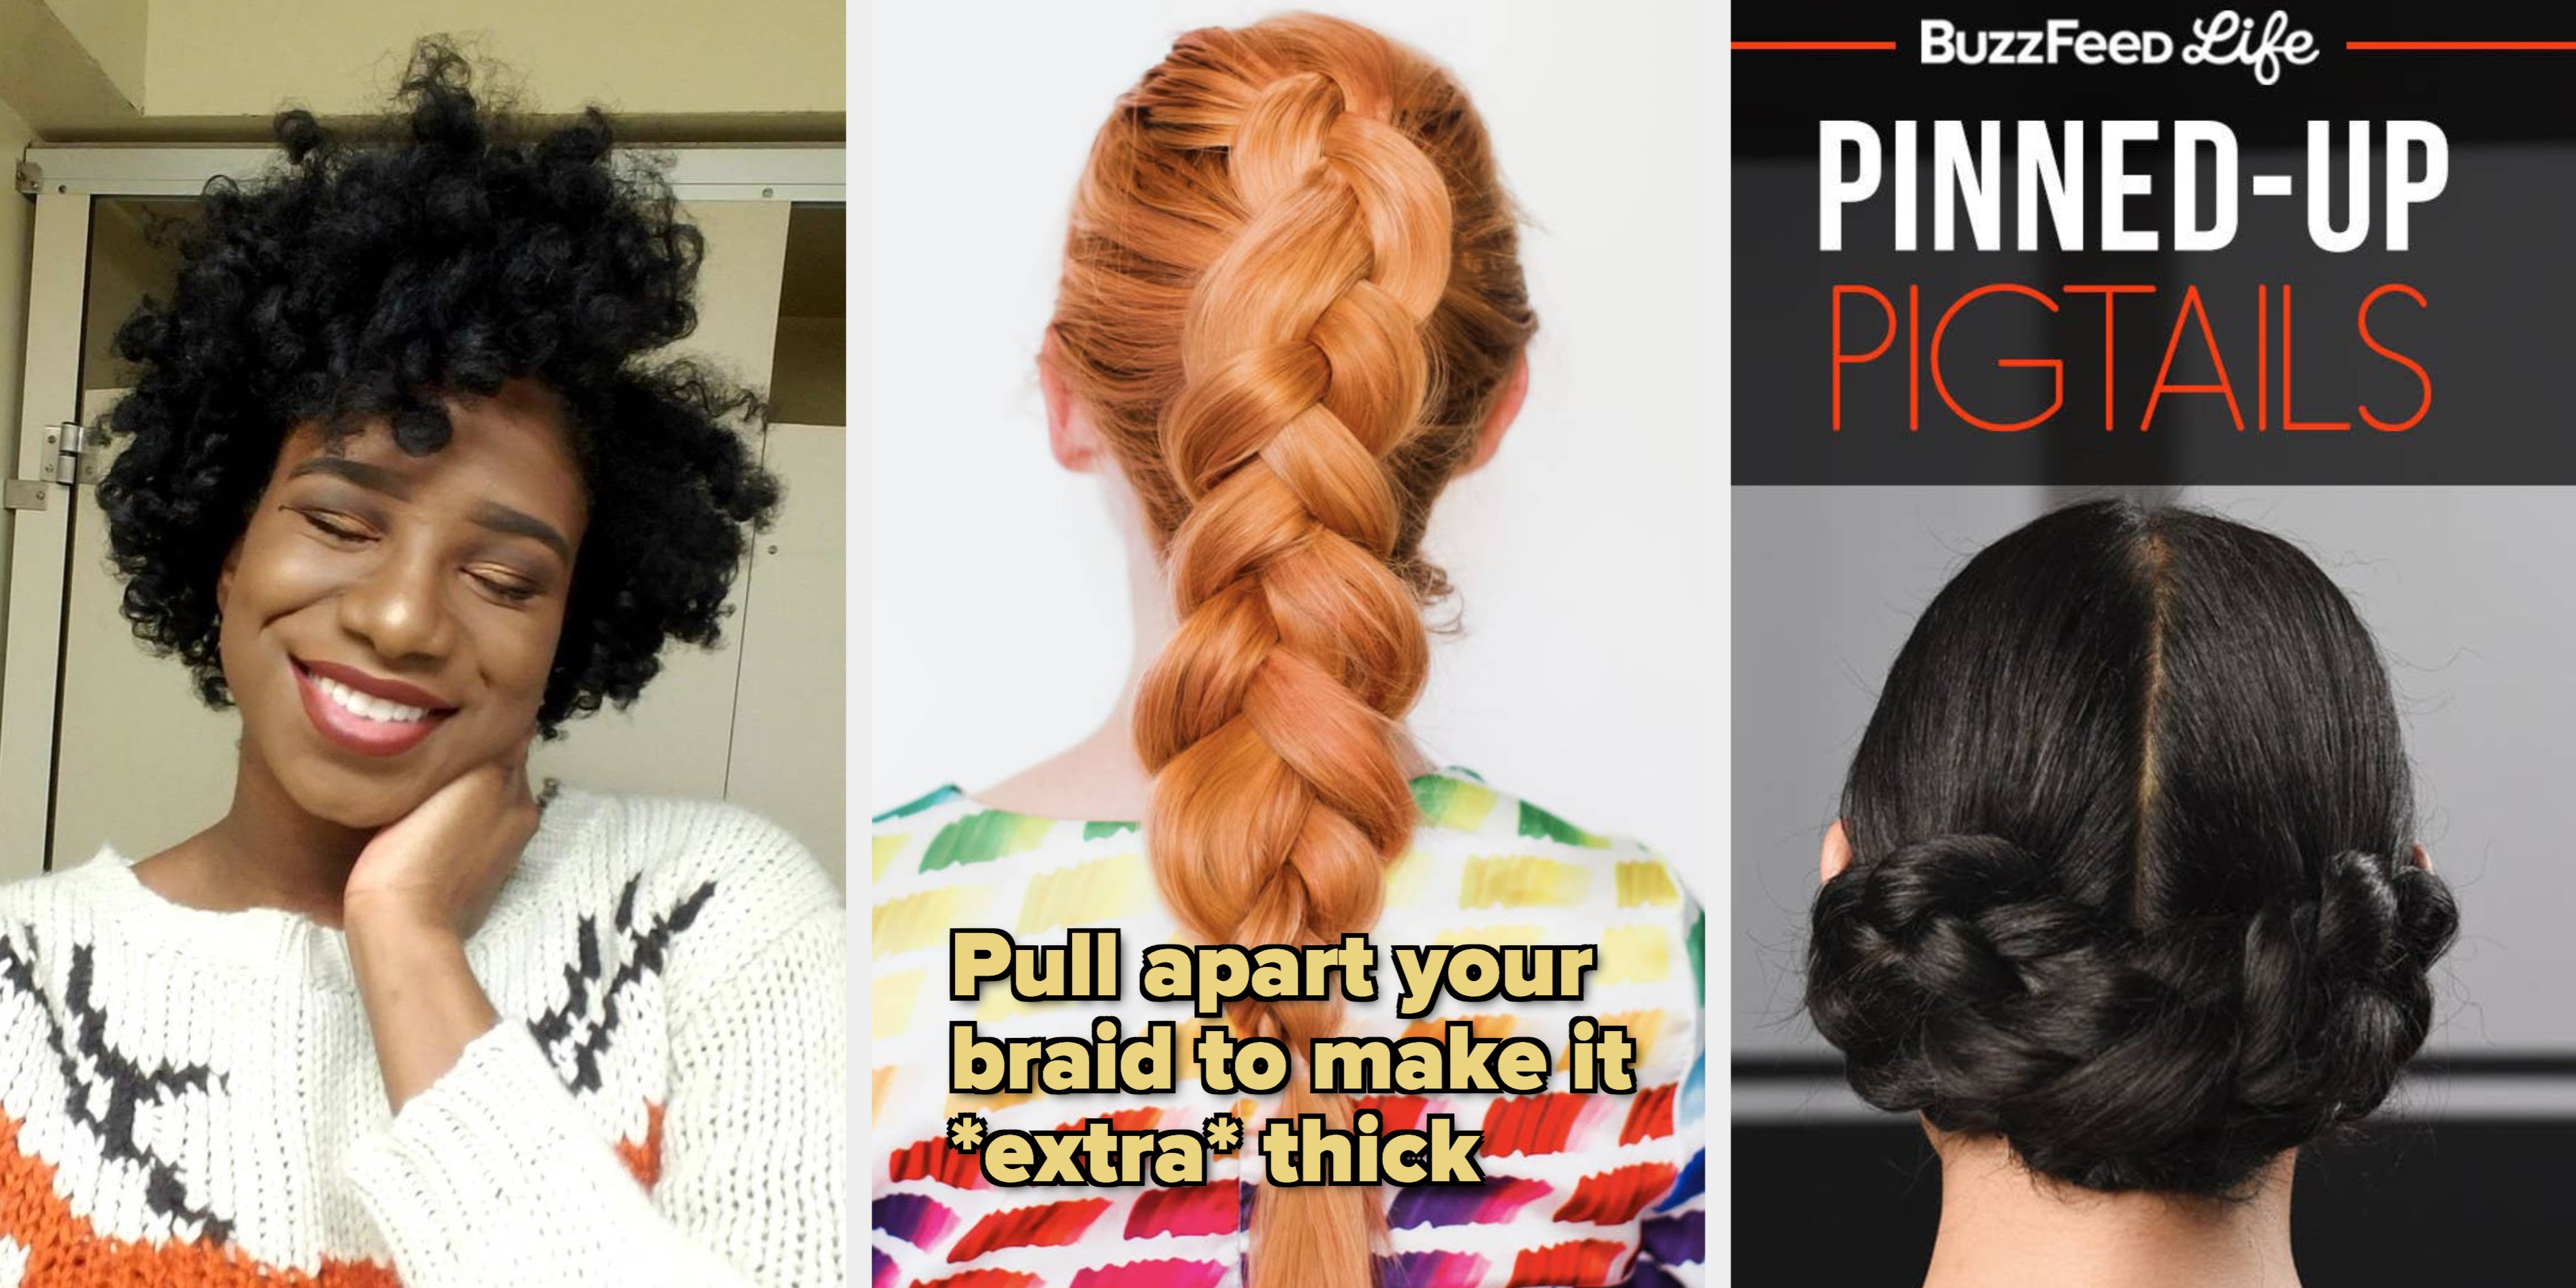 41 Tips And Tricks For Anyone Who Wants To Get Better At Doing Their Hair